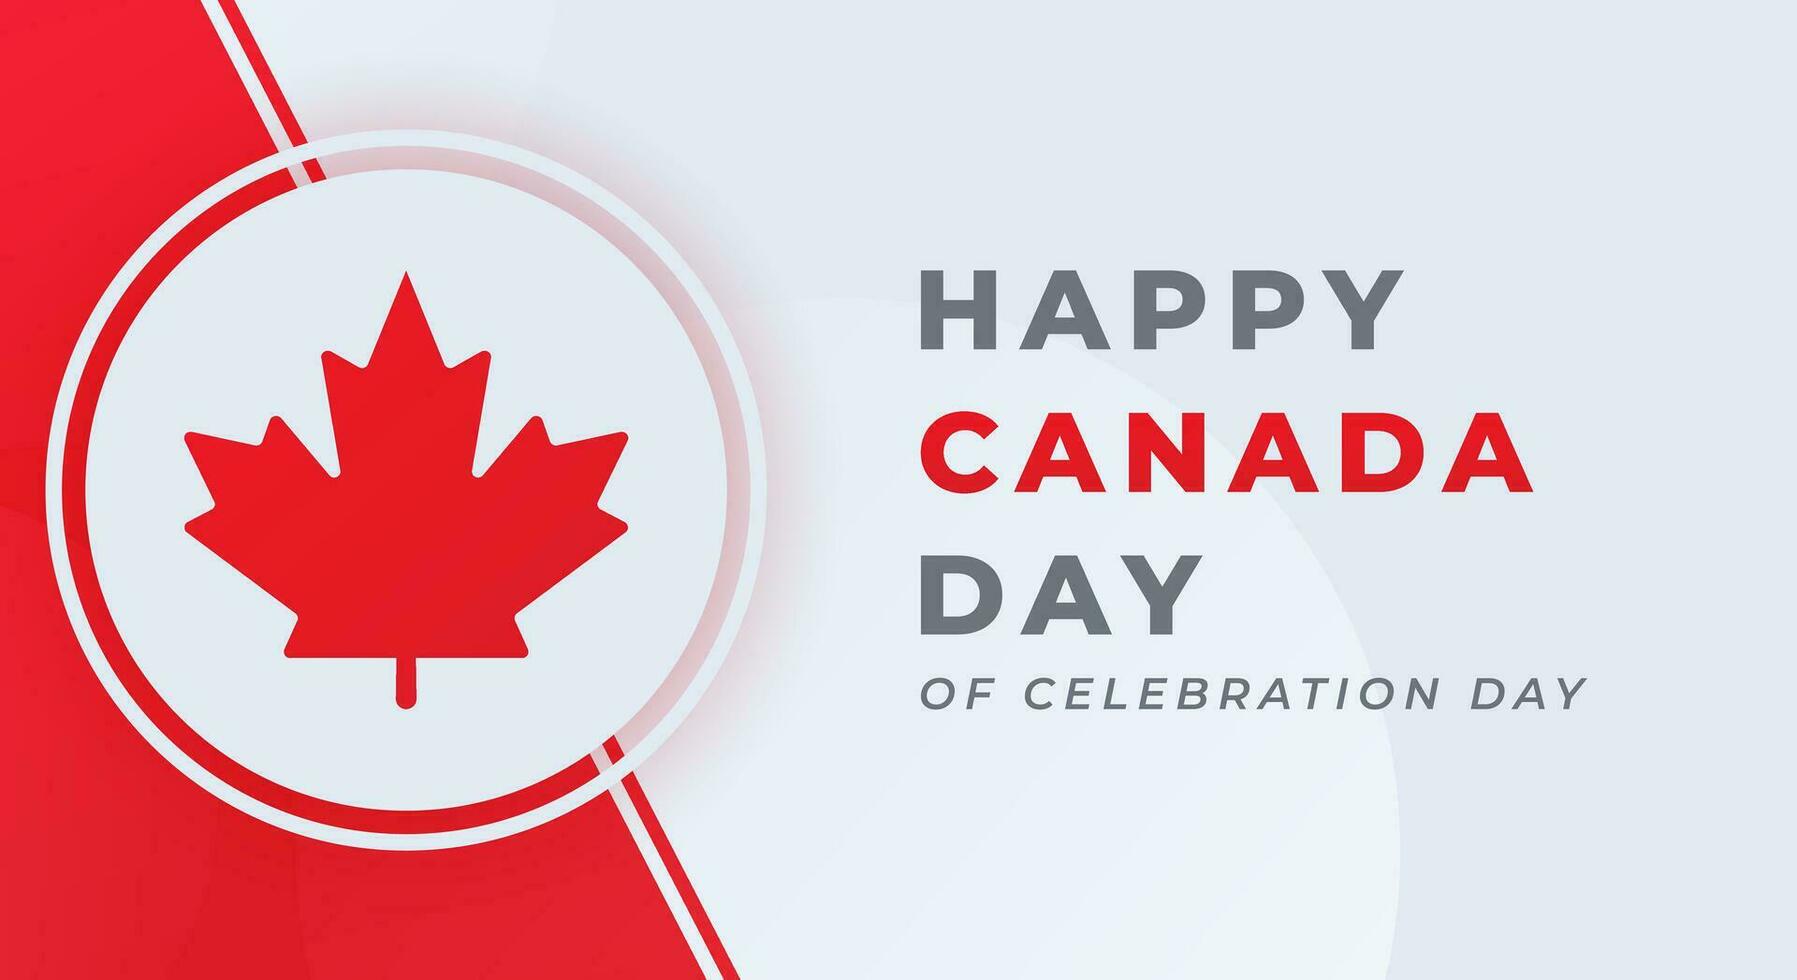 Happy Canada Day Celebration Vector Design Illustration for Background, Poster, Banner, Advertising, Greeting Card